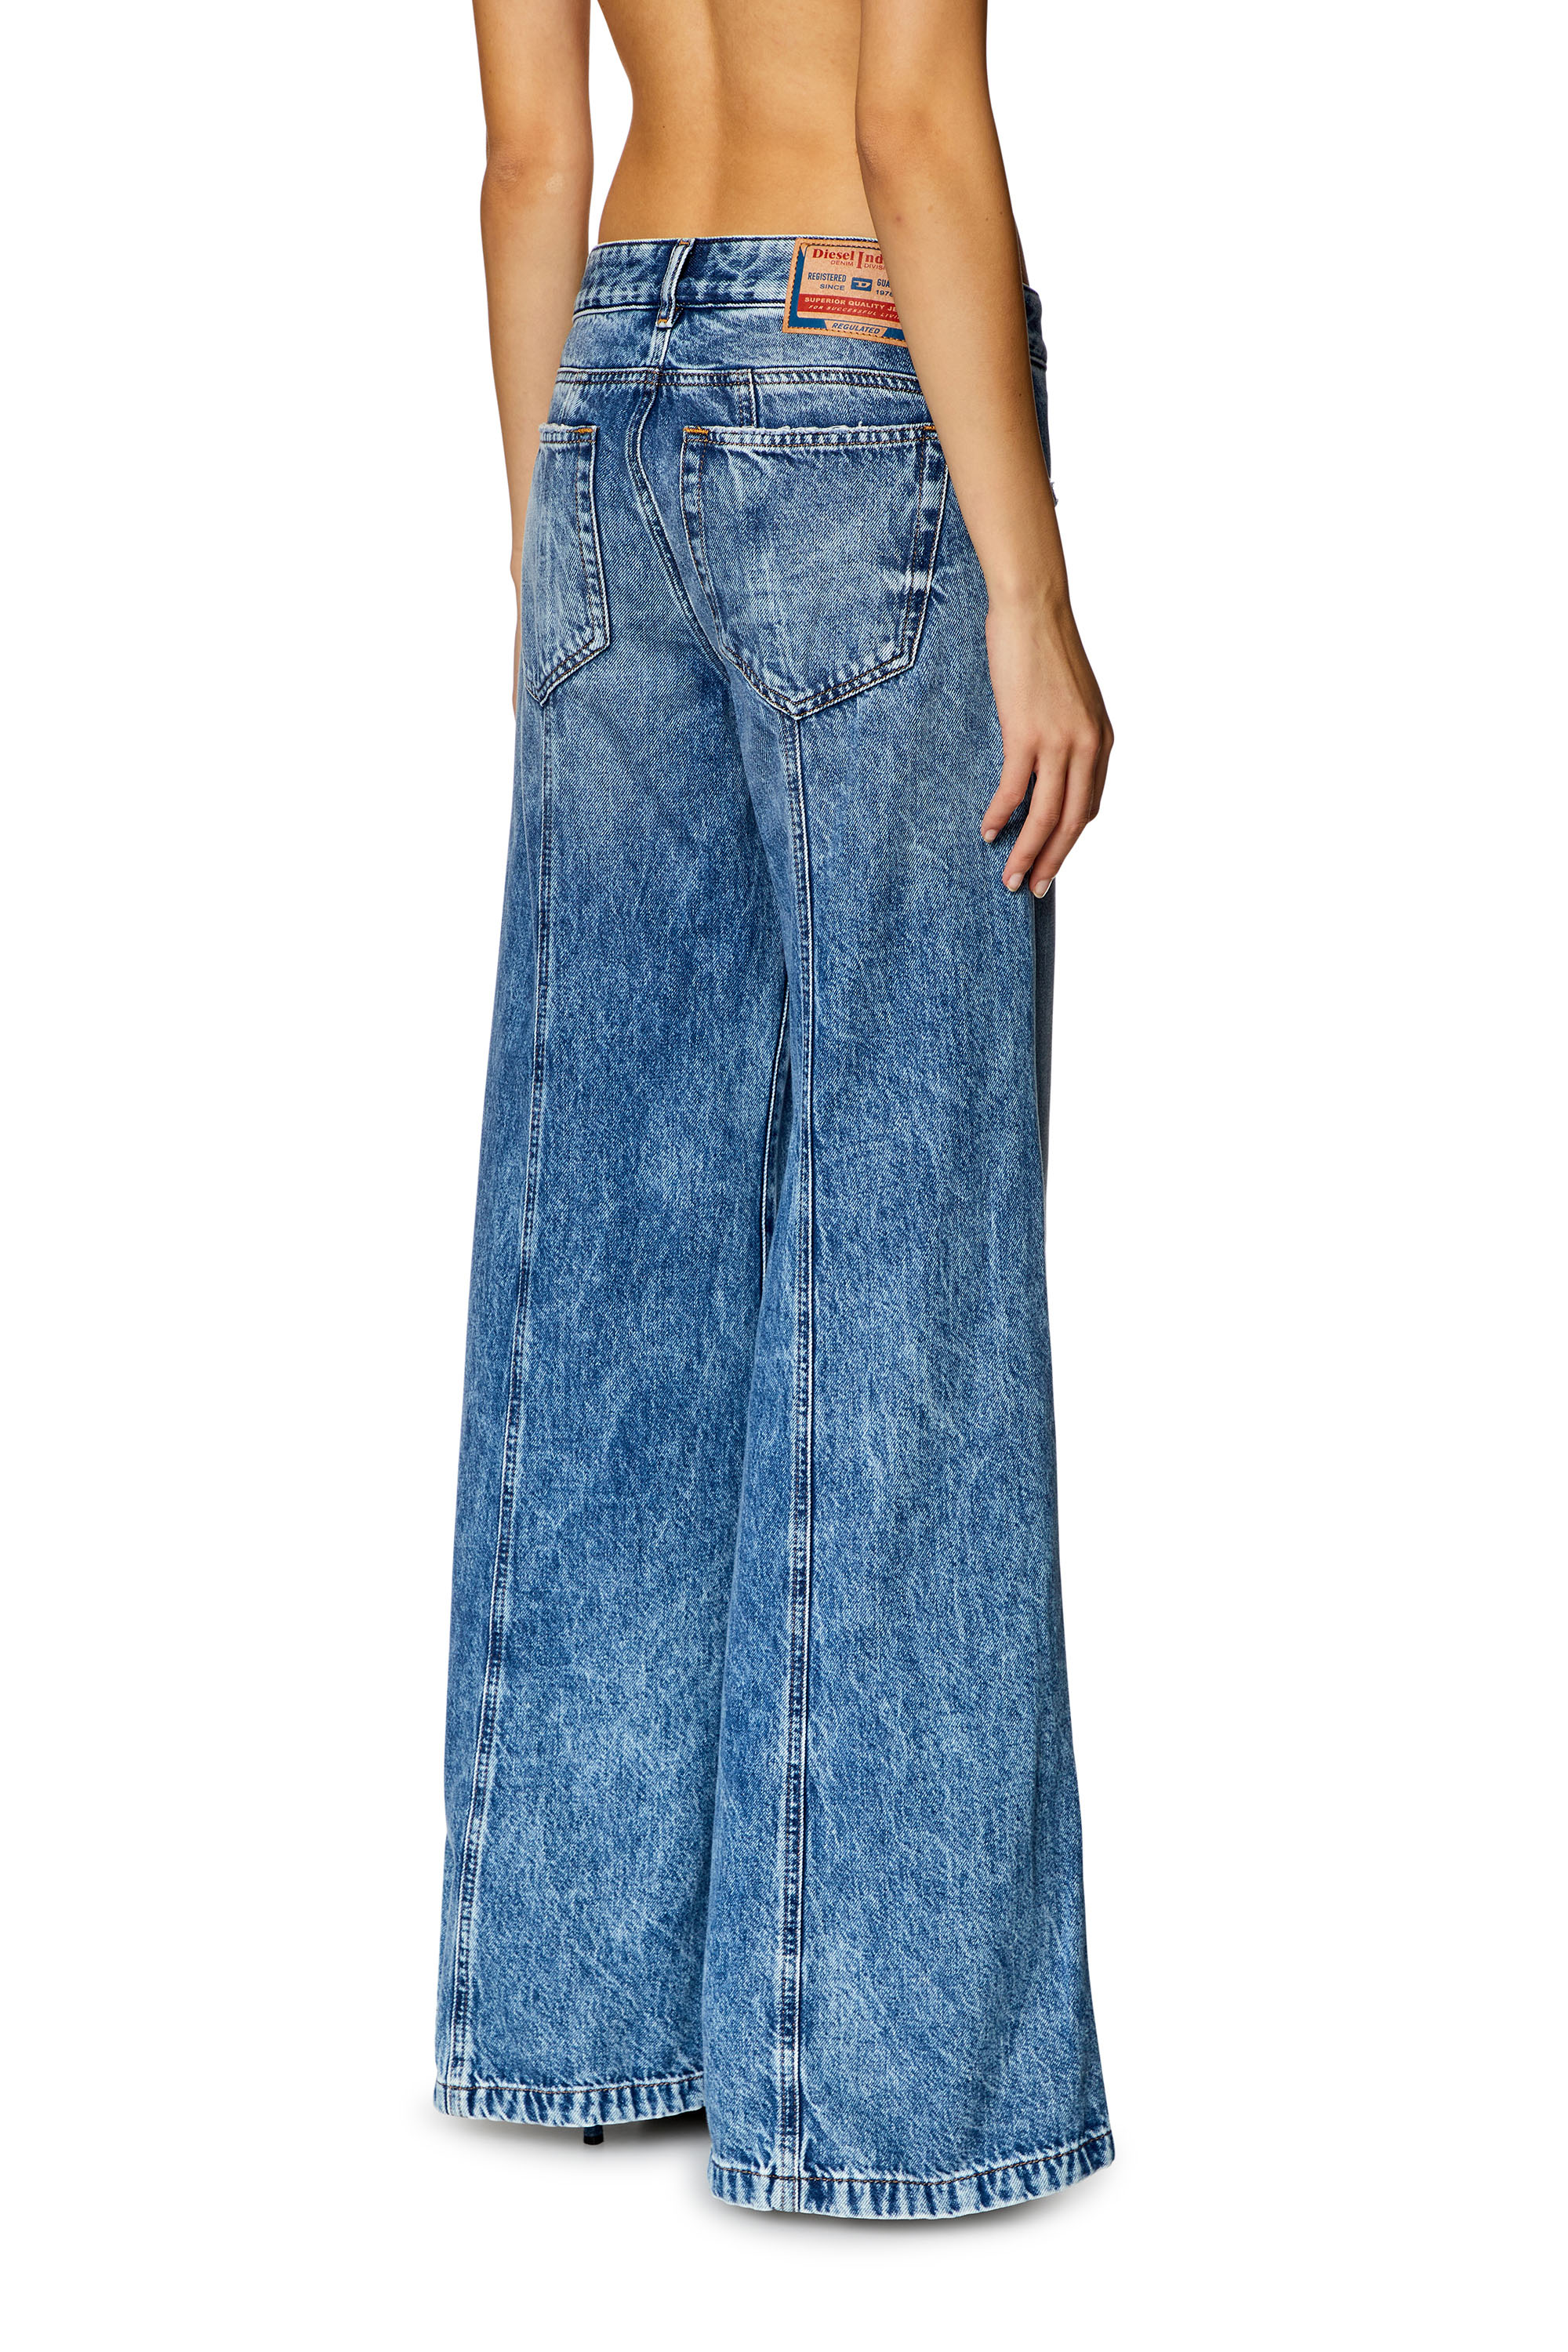 Diesel - Bootcut and Flare Jeans D-Akii 09H95, Mujer Bootcut y Flare Jeans - D-Akii in Azul marino - Image 3